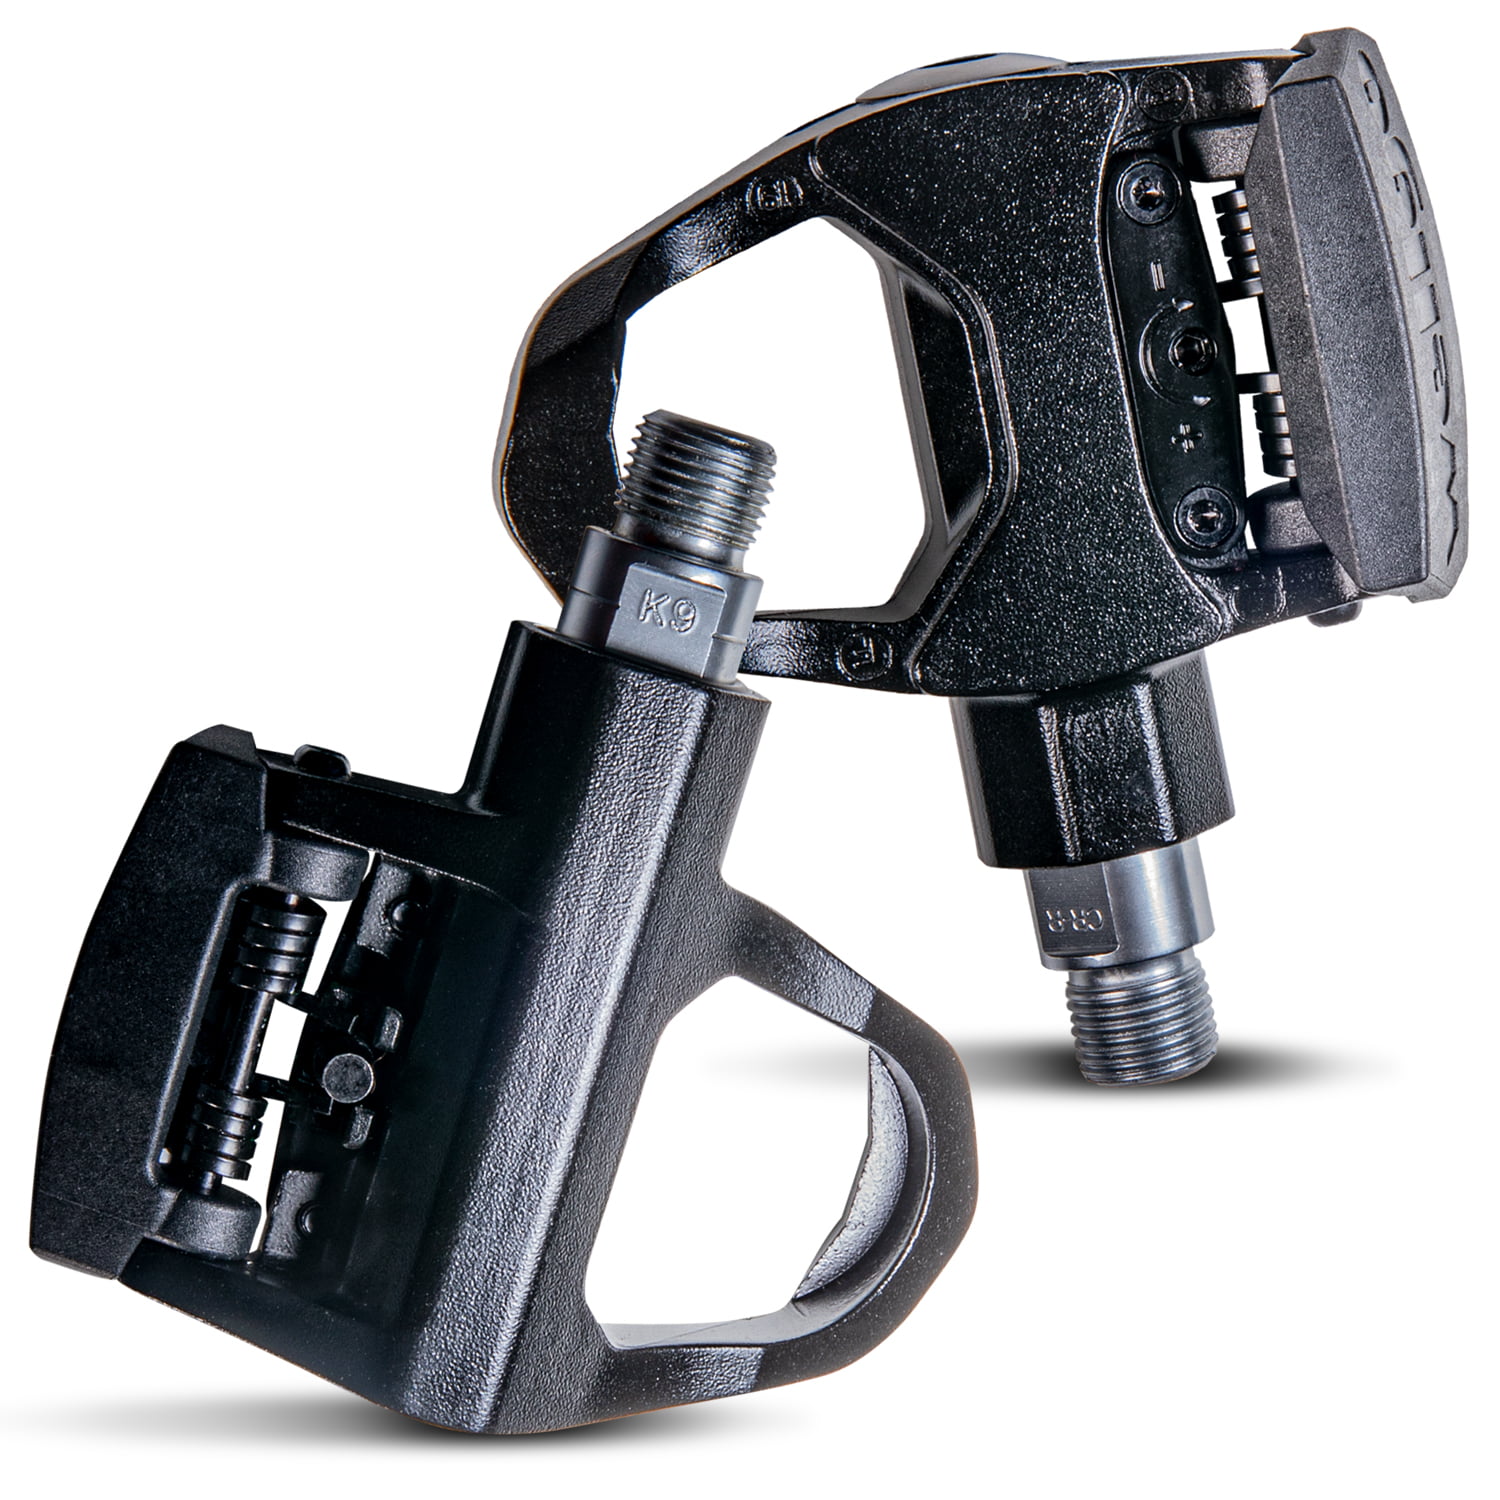 Wellgo Road and Indoor Cycling Pedals Compatbile with Peloton Bike